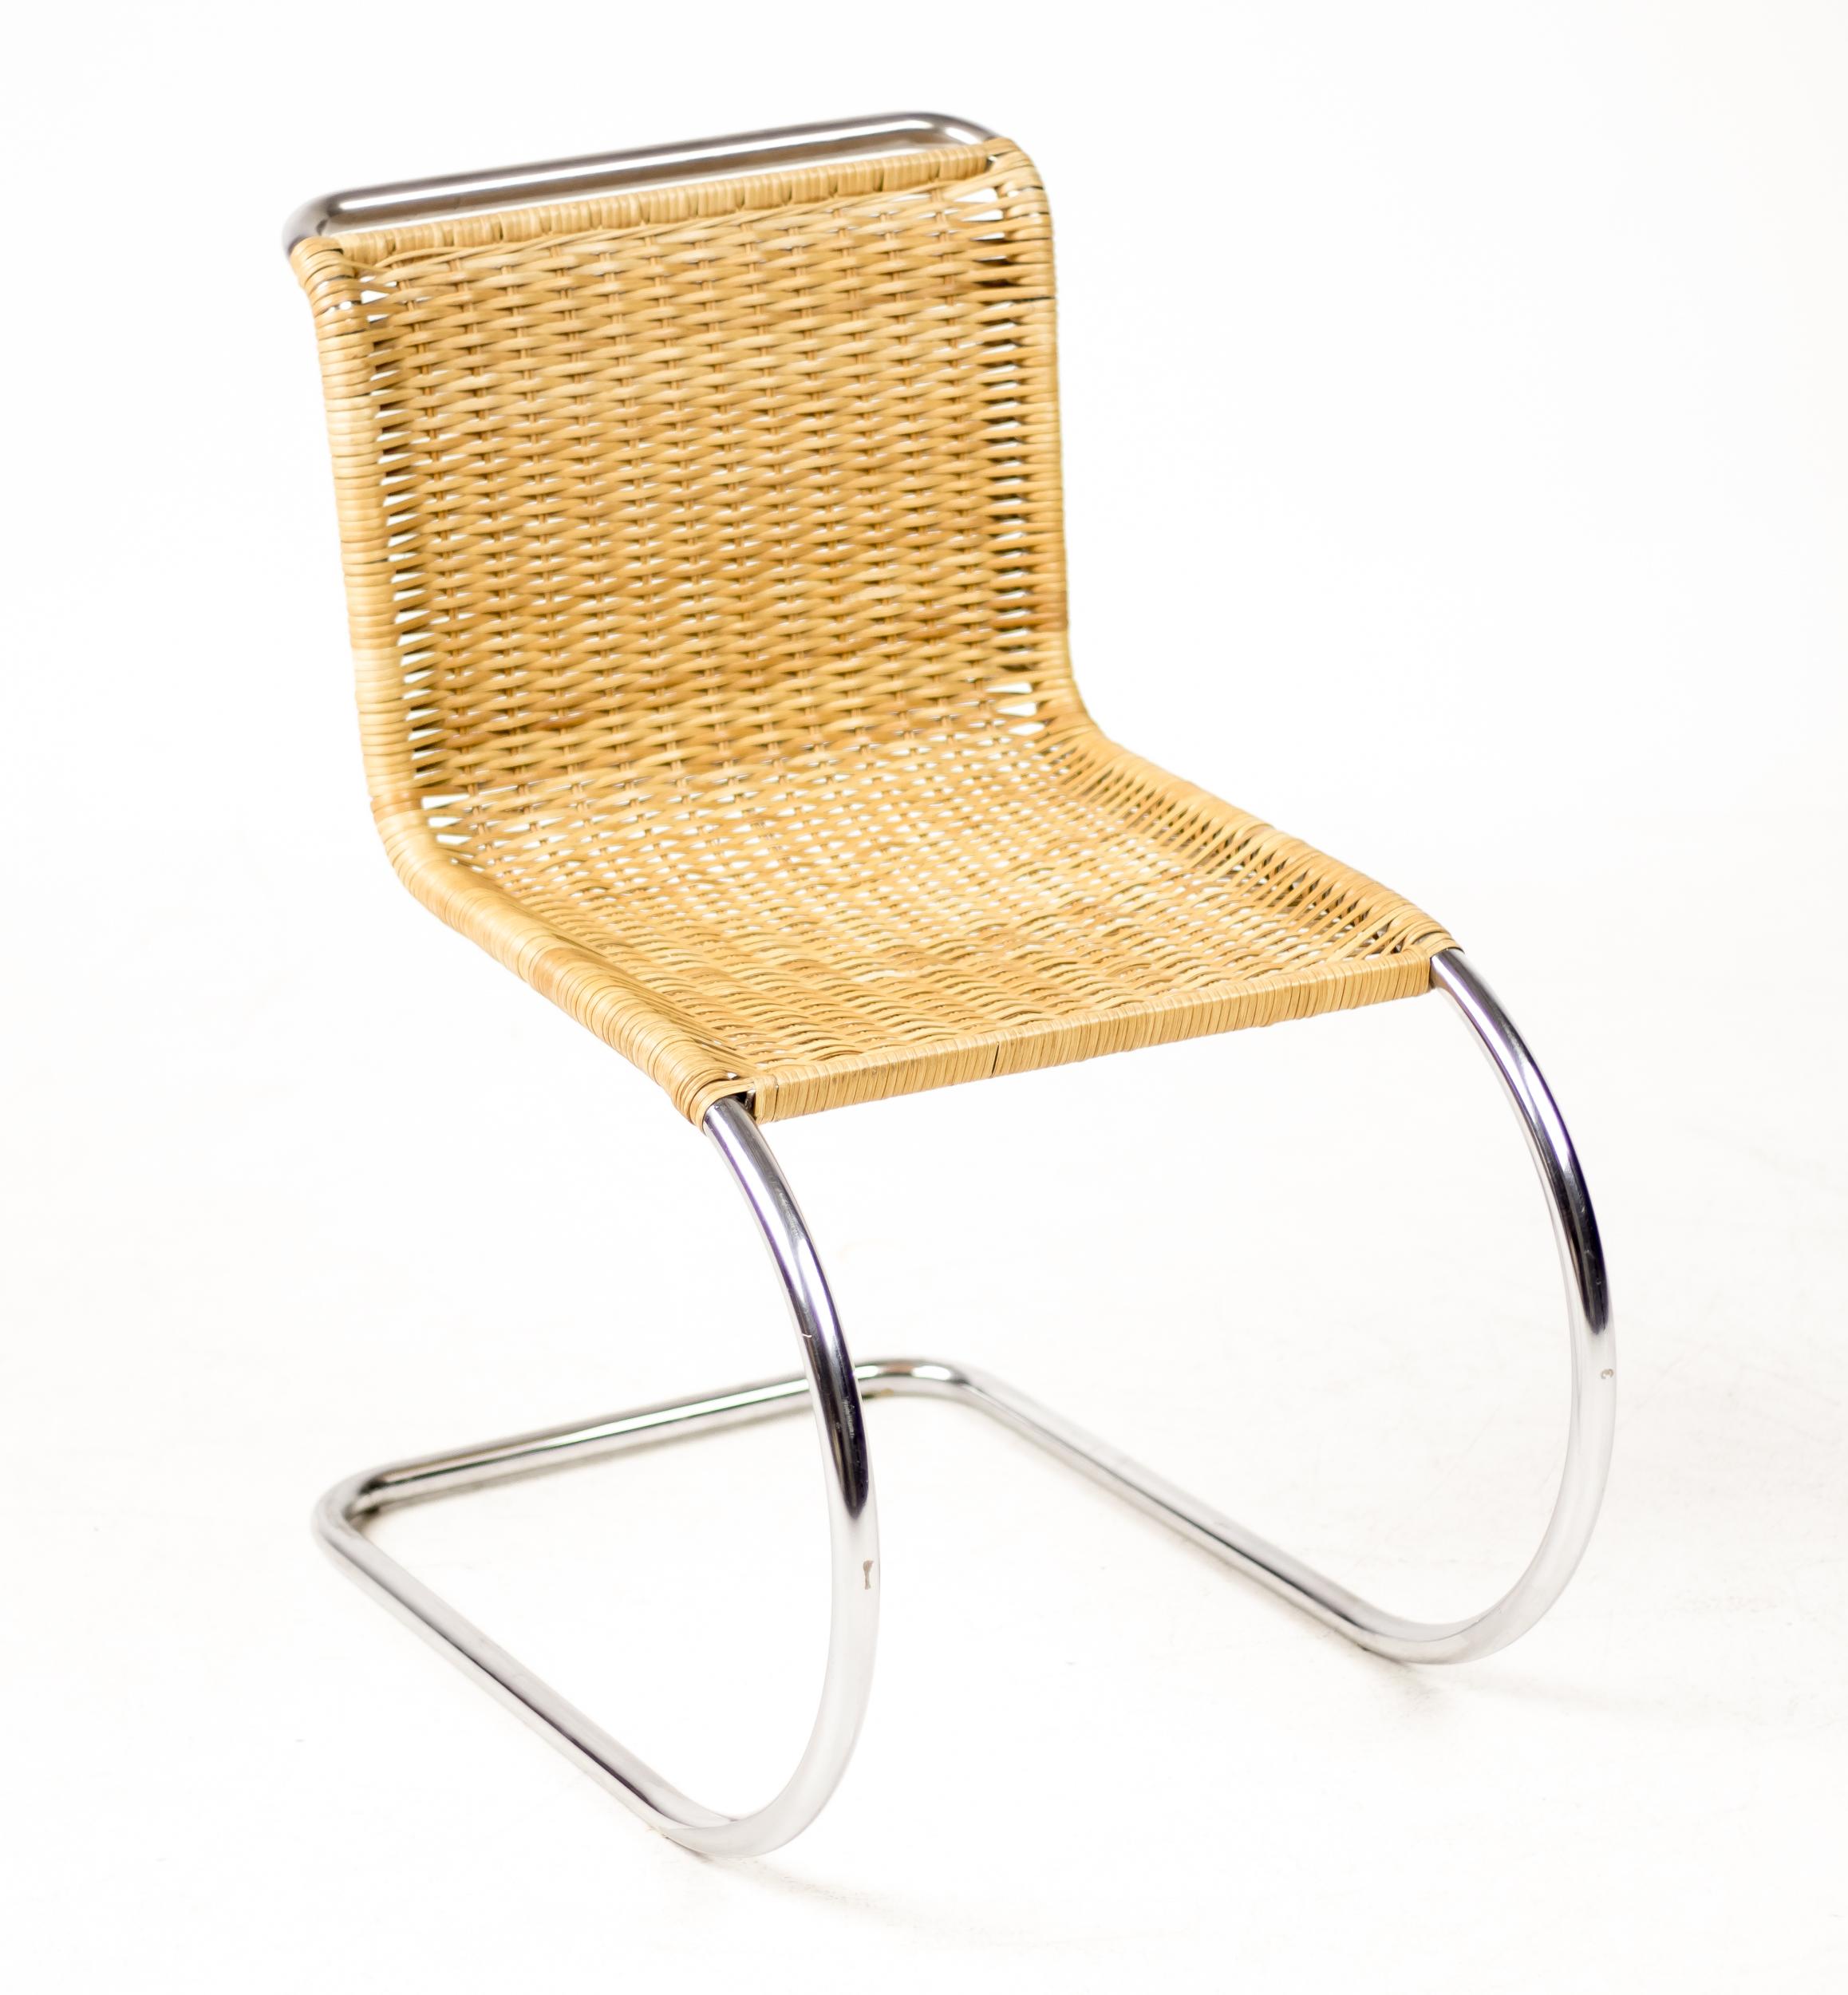 This chair’s deceptively simple design embodies the “less is more” philosophy of Mies van der Rohe. The ultra-modern chrome finish sharply contrasts with the natural woven-cane seat and back, creating a streamlined appearance that exemplifies